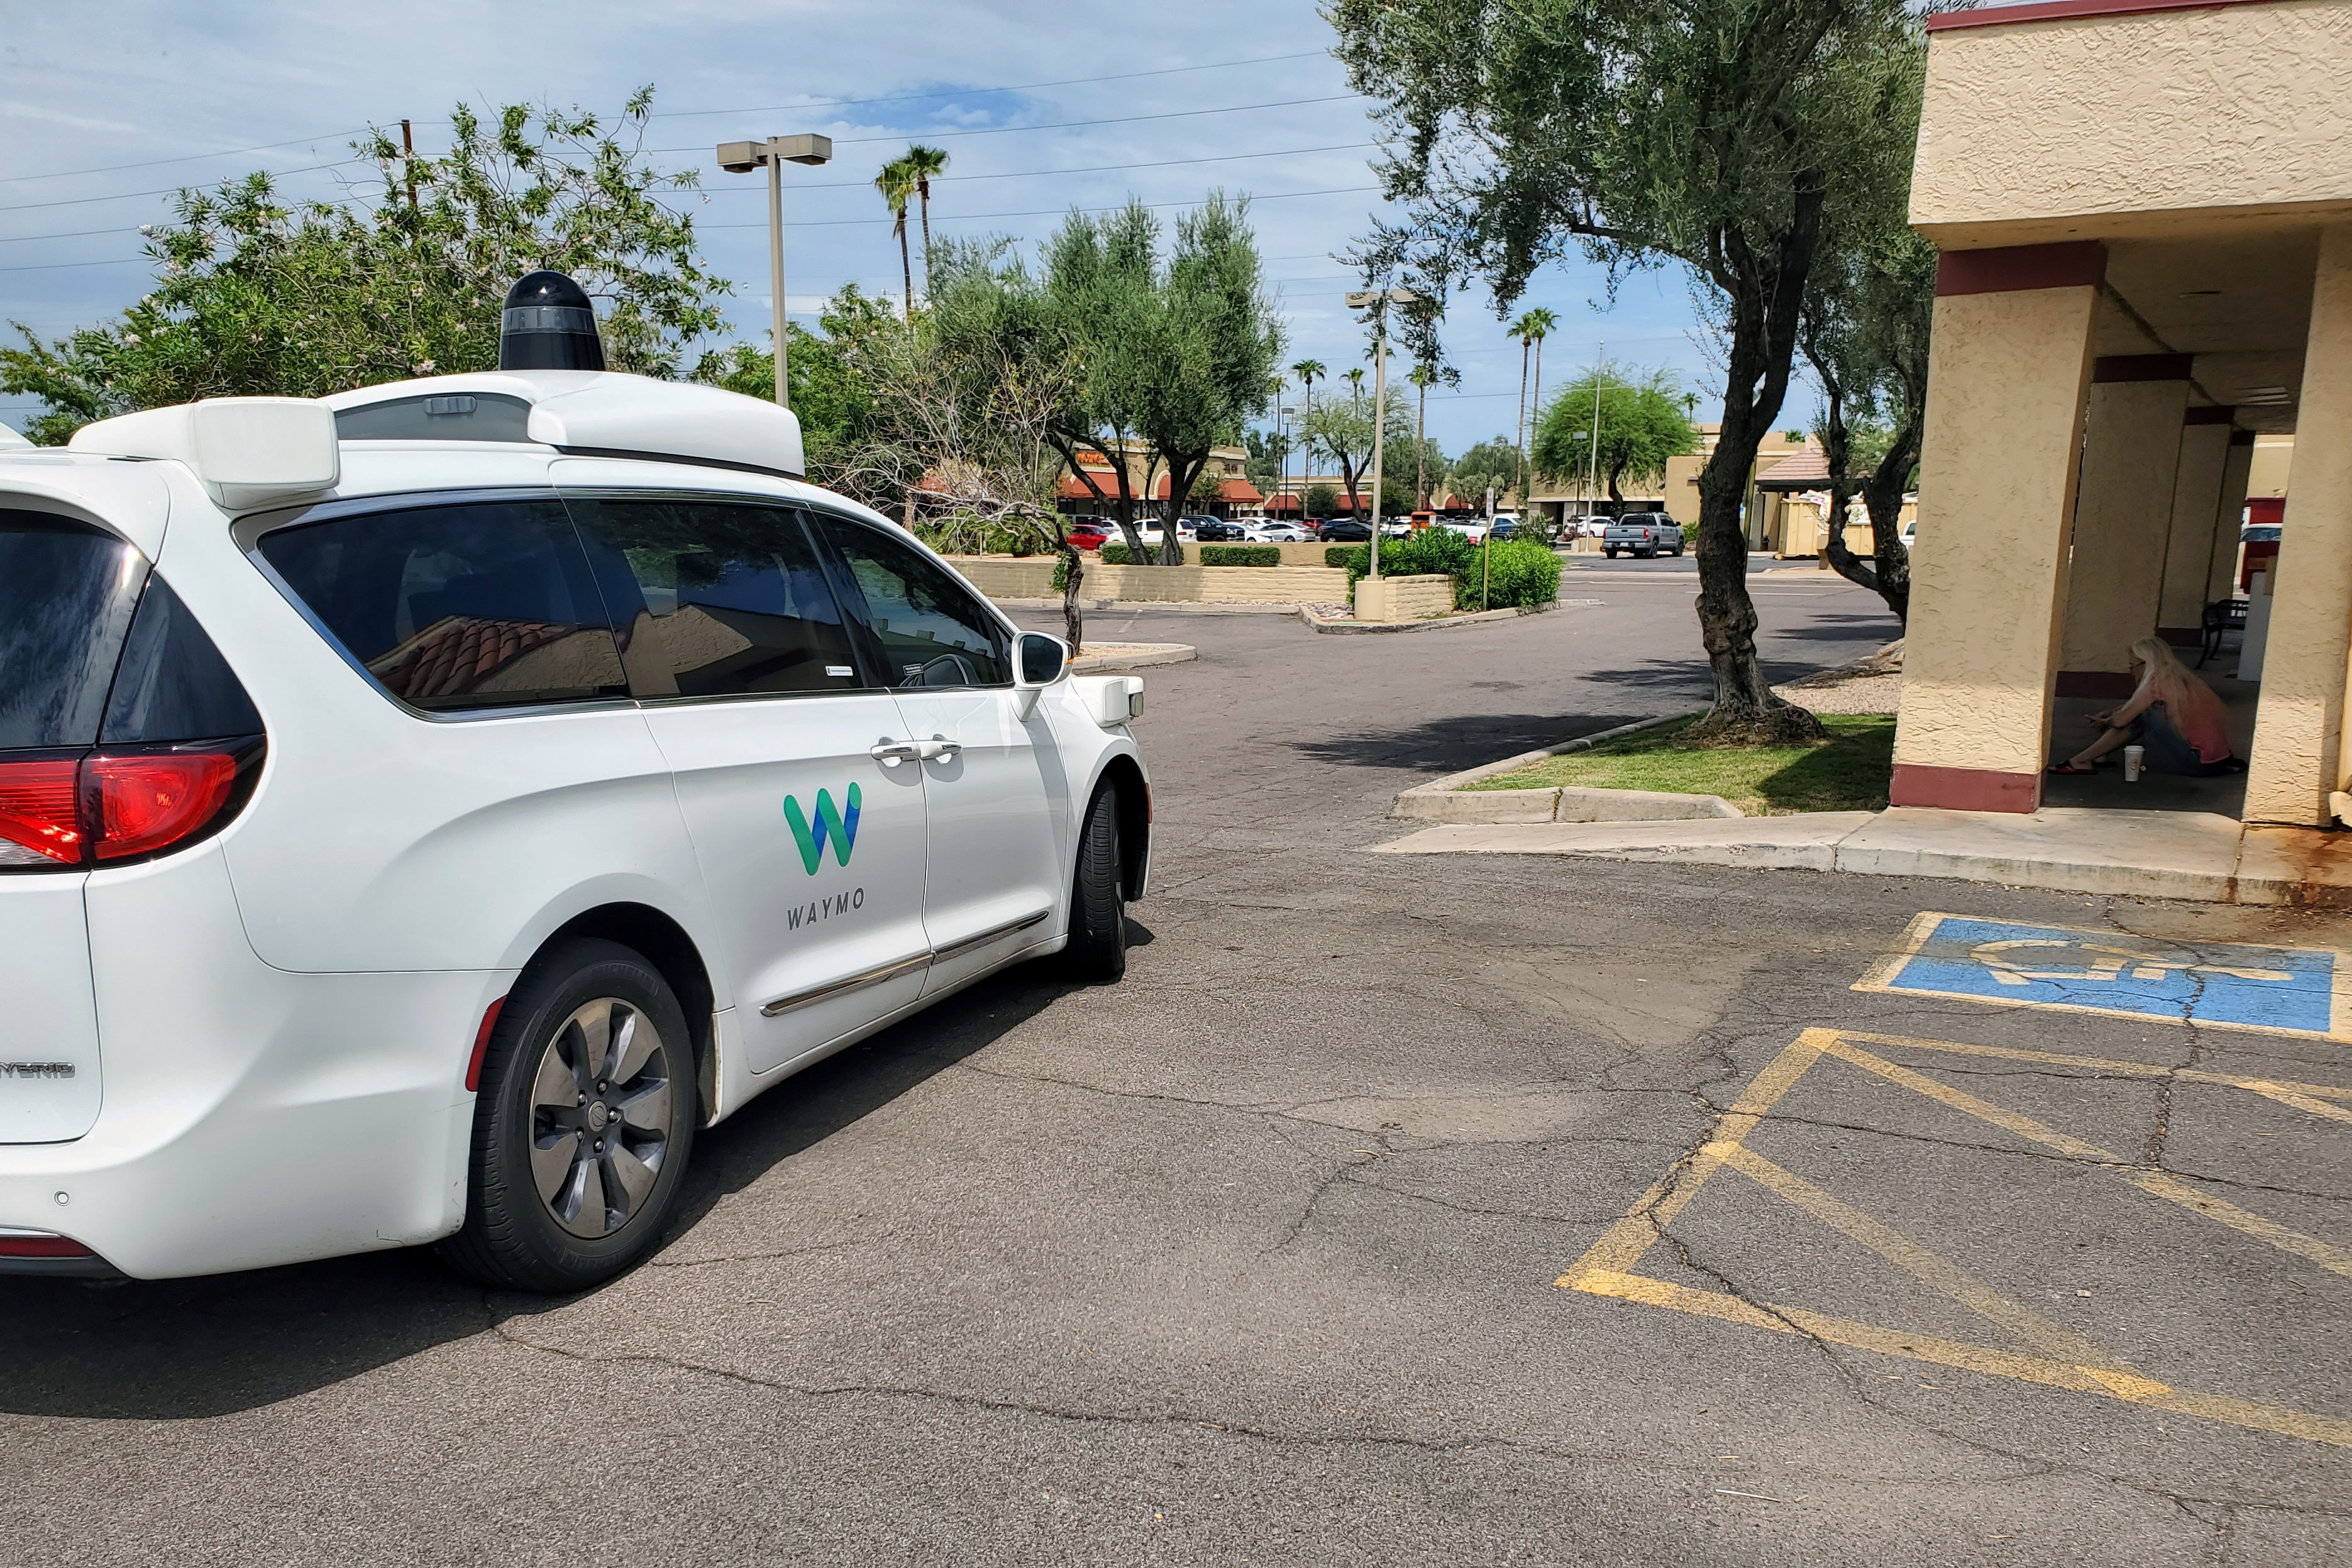 Driverless Waymo Chrysler Pacifica minivan partially blocks access to a disabled parking space in Tempe